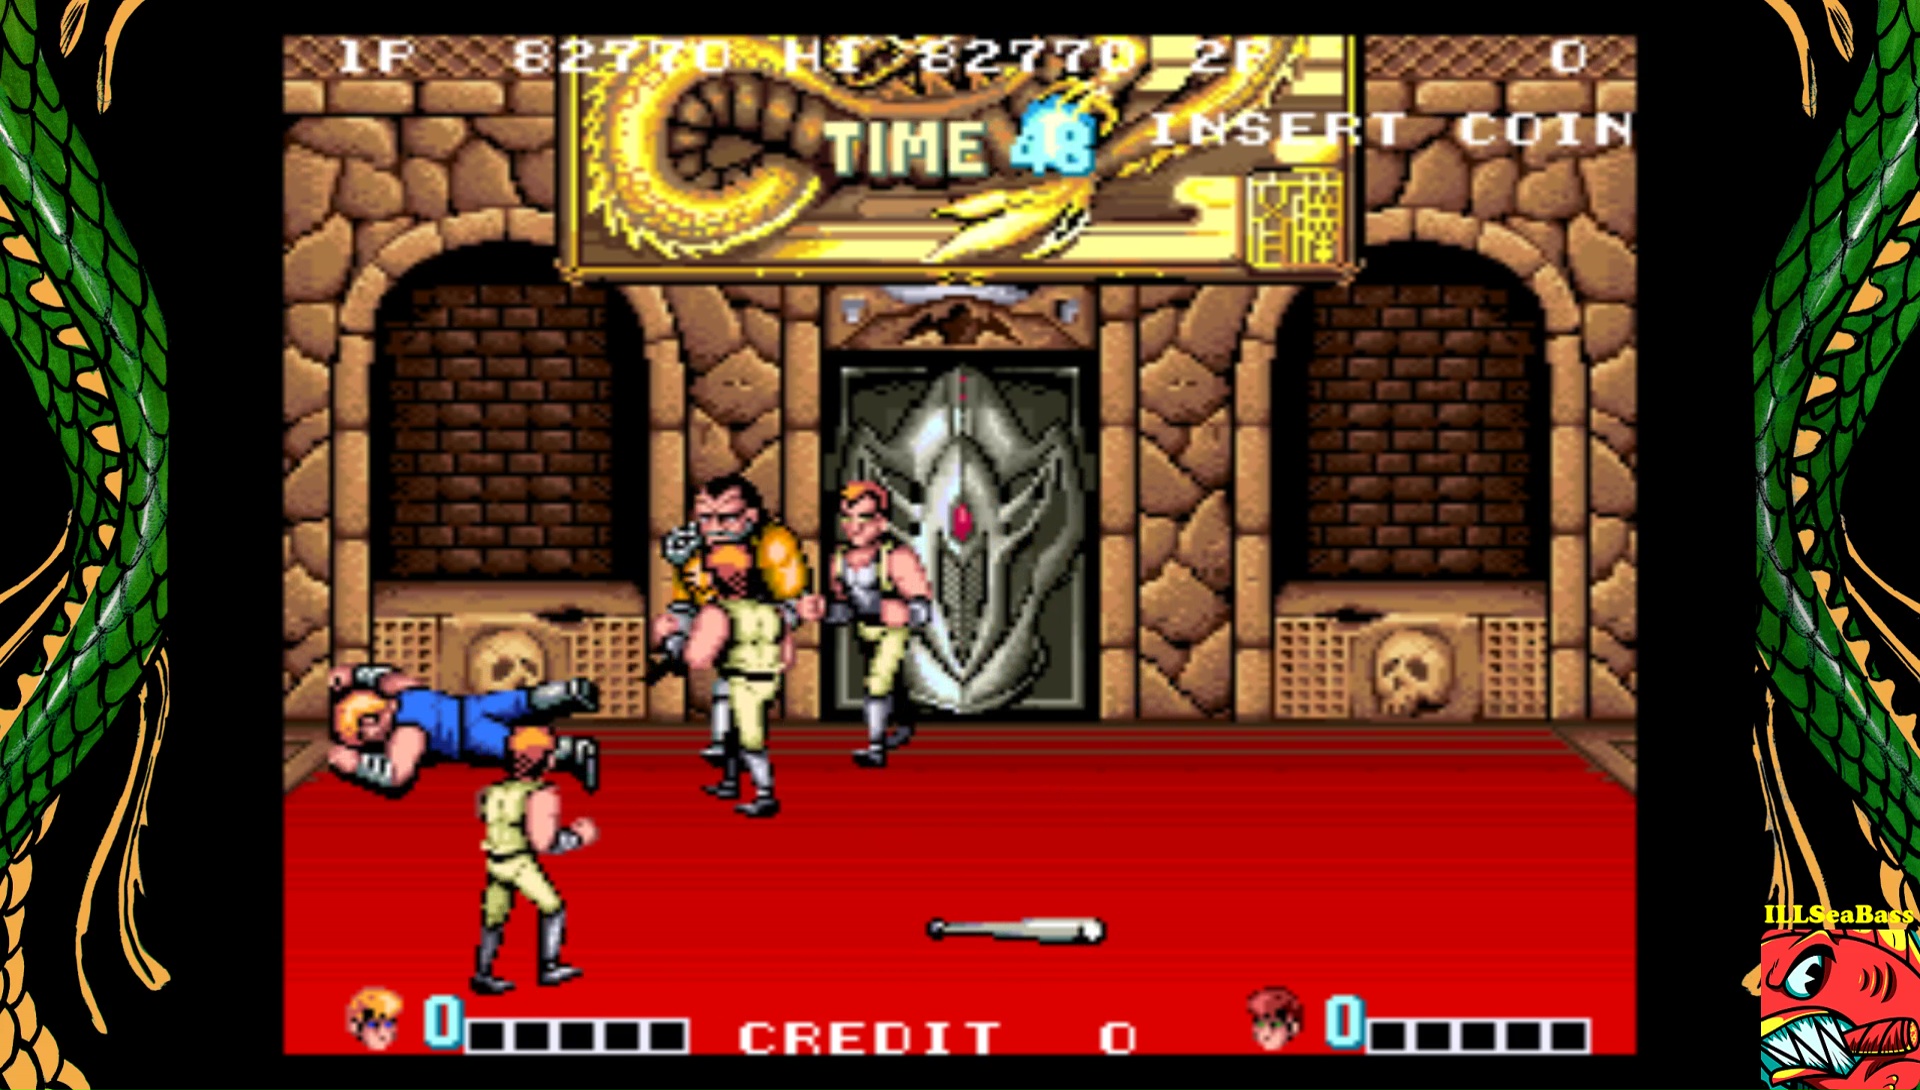 ILLSeaBass: Double Dragon (Arcade Emulated / M.A.M.E.) 82,700 points on 2017-09-04 21:58:10